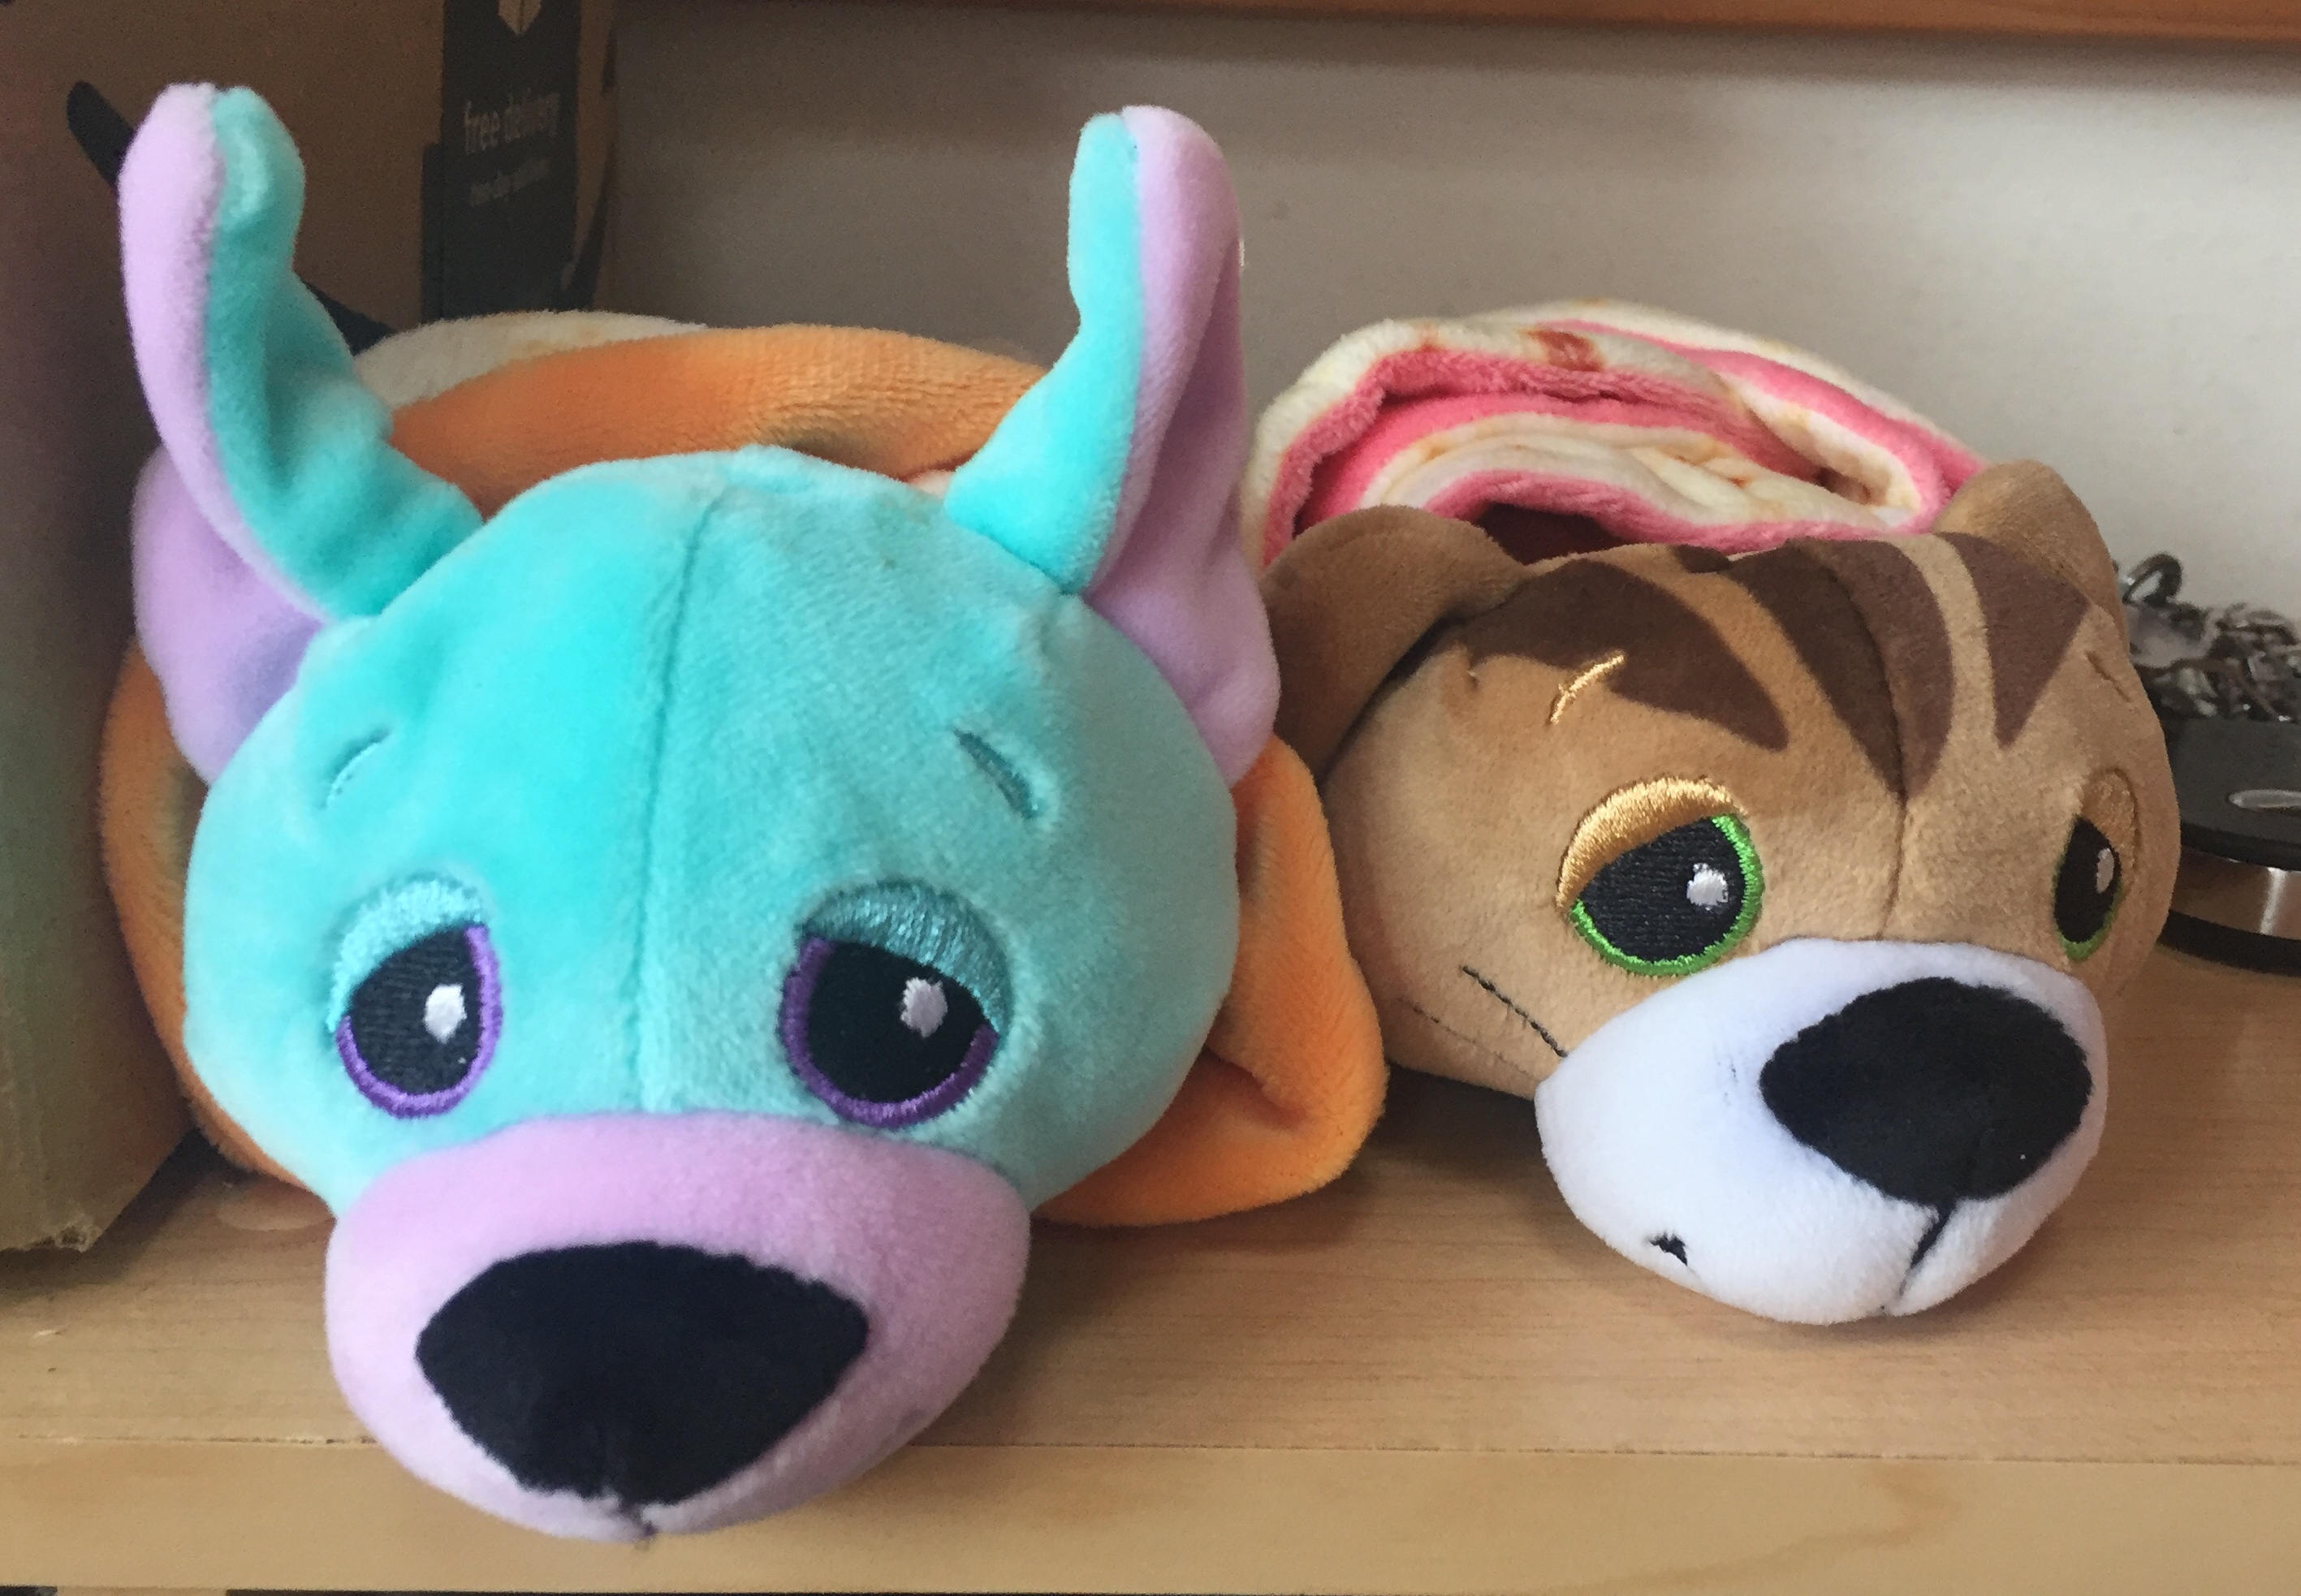 Cutetitoes burrito wrapped surprise stuffed animals blind bag